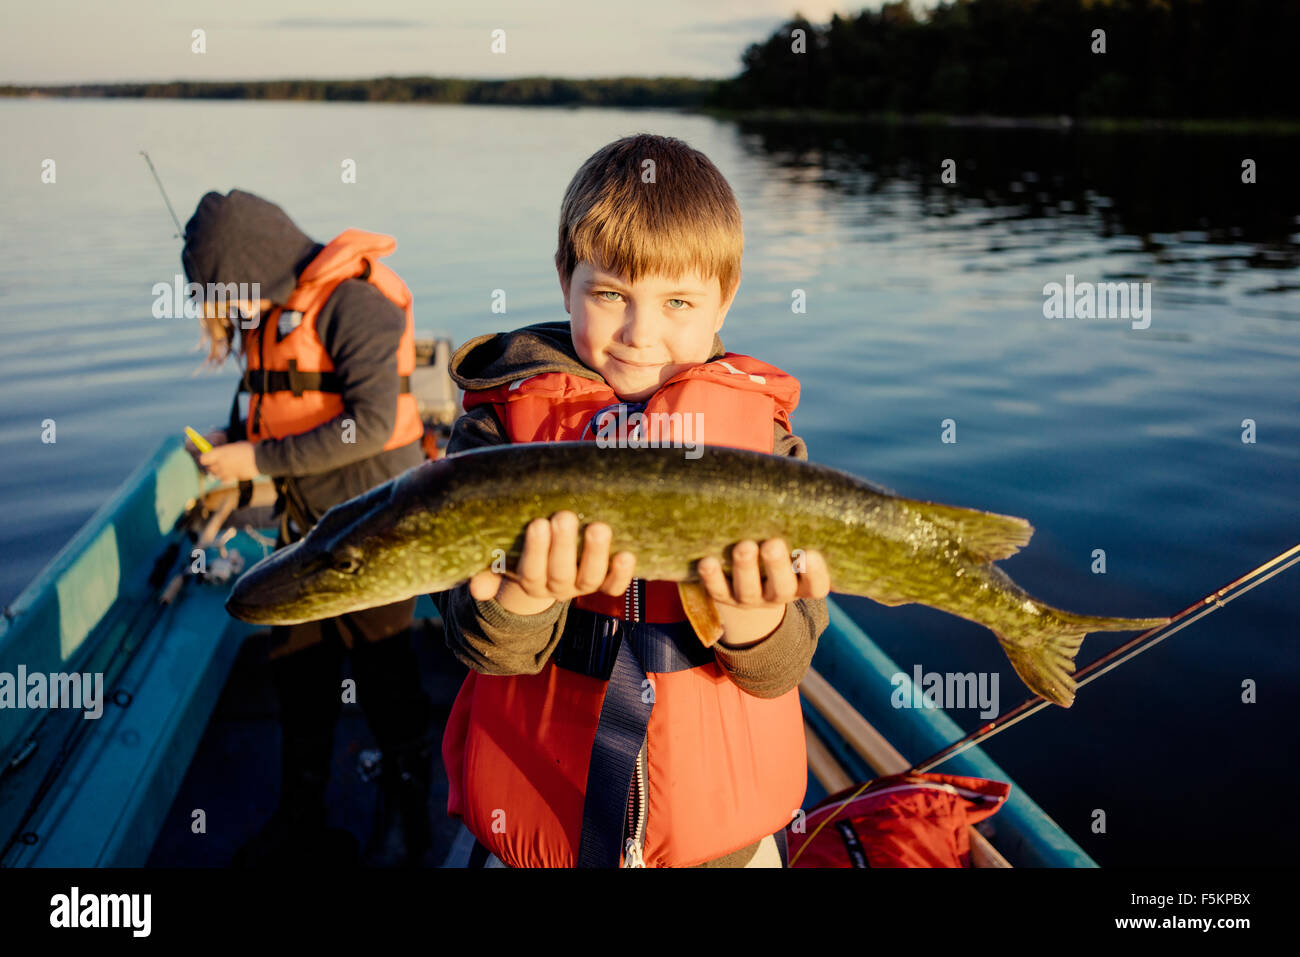 Sweden, Smaland, Tjust archipelago, Vastervik, Hasselo, Boy (10-11) on boat showing caught fish with girl in background (8-9) Stock Photo